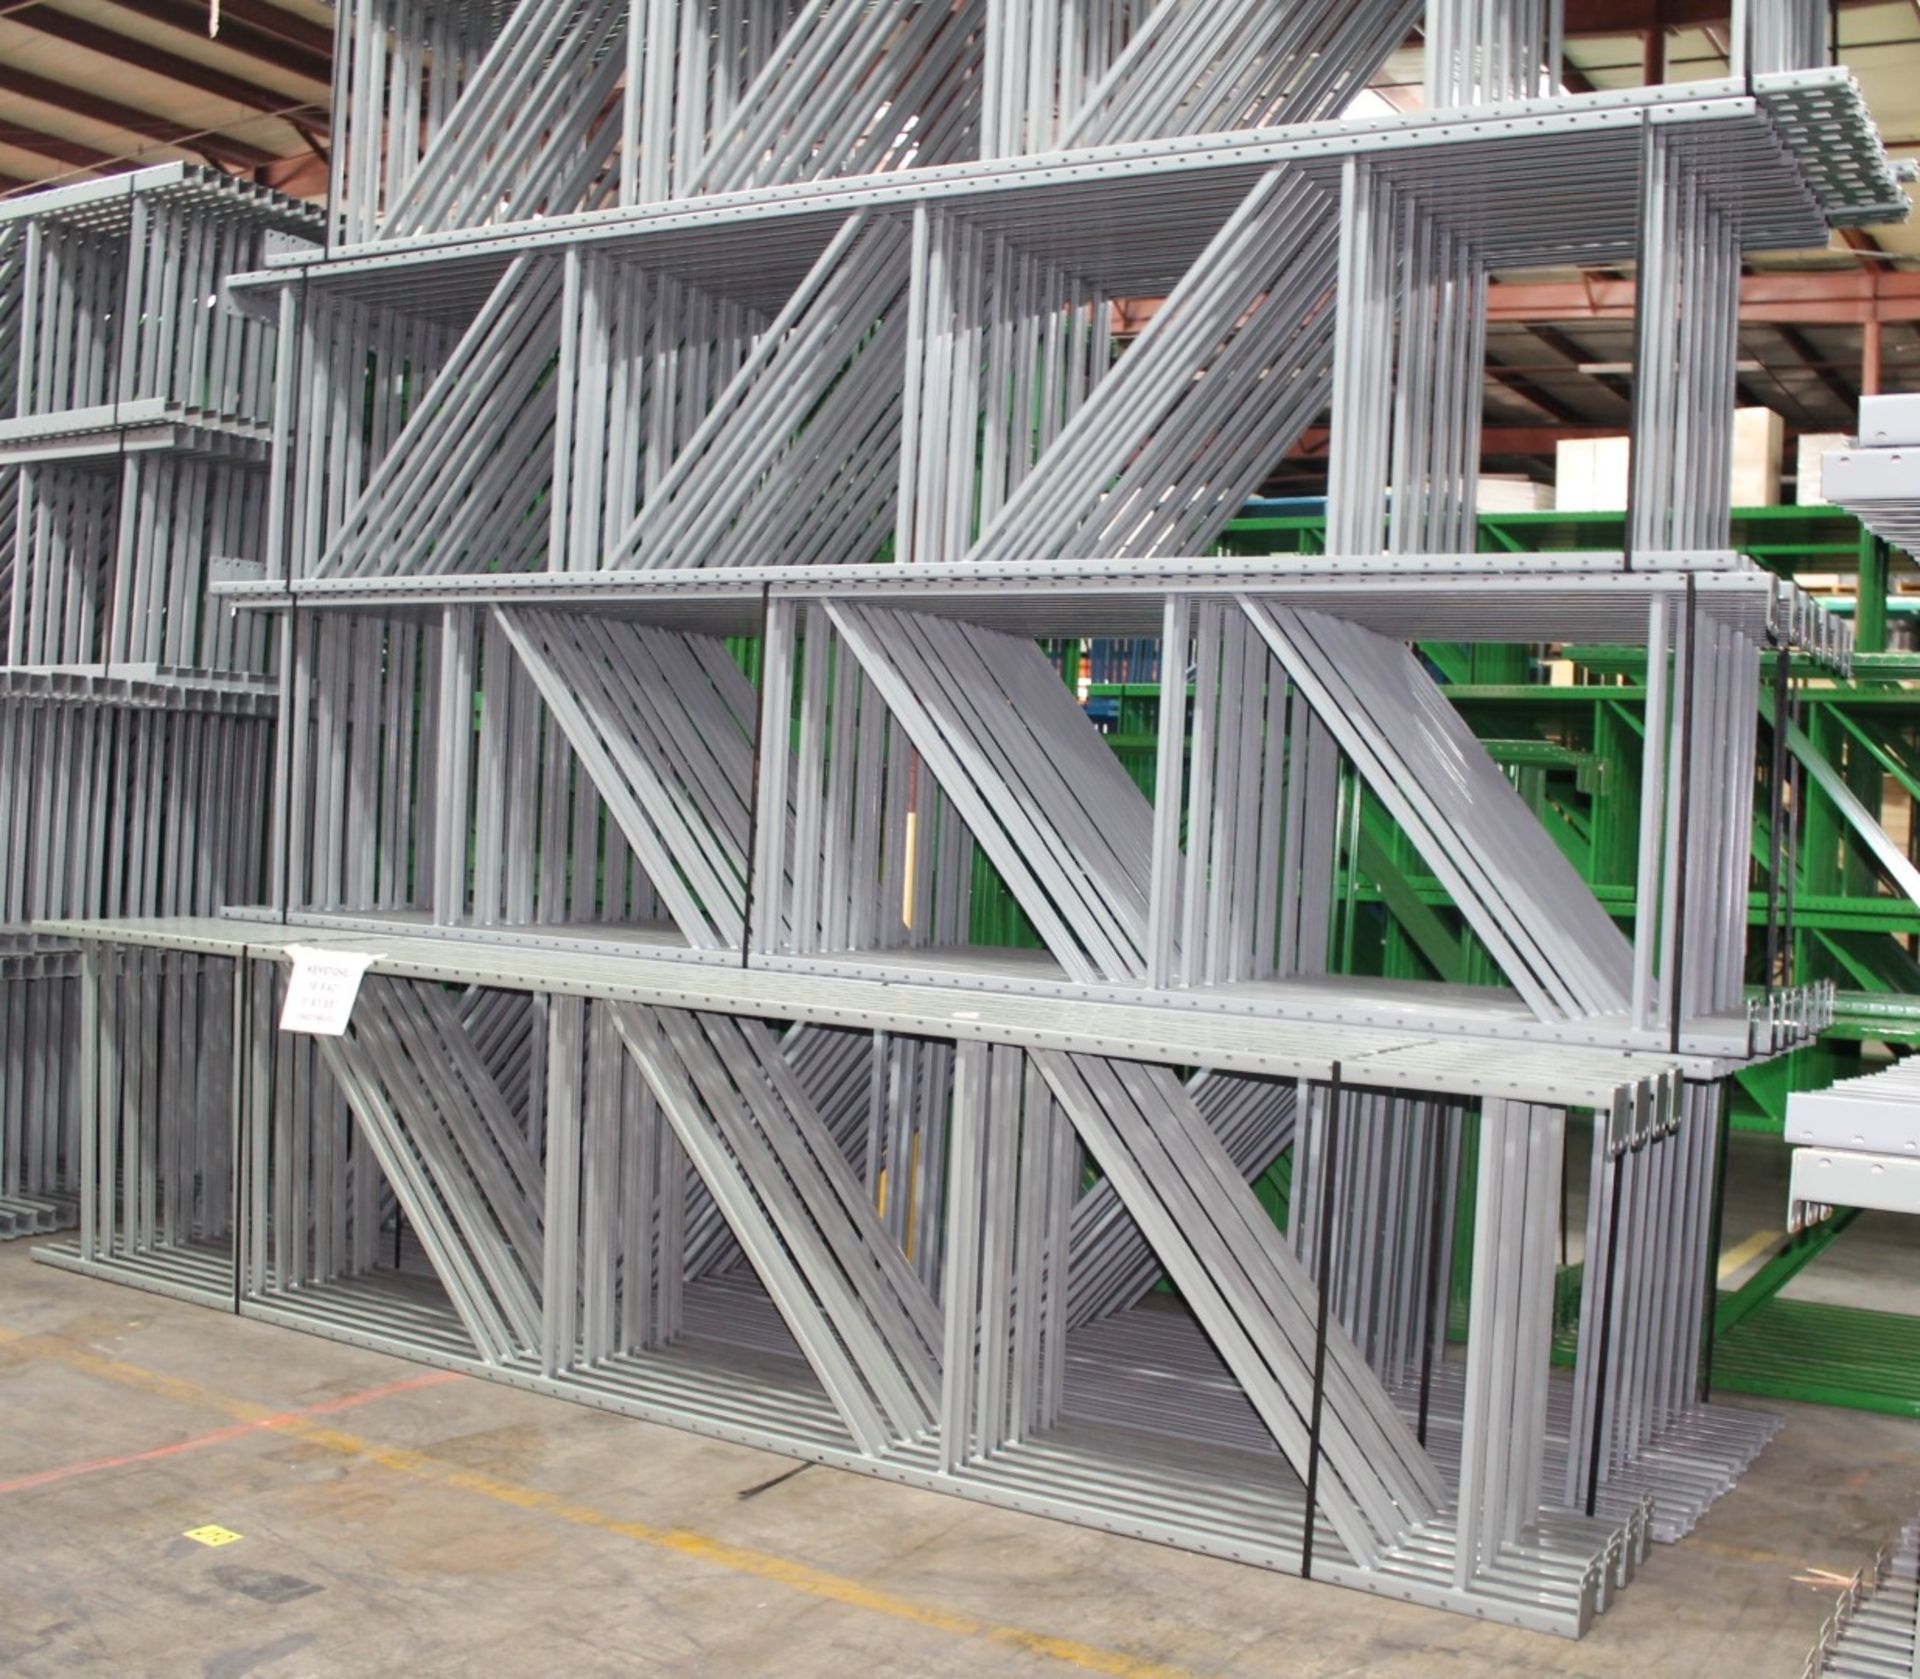 LIKE NEW KEYSTONE STYLE PALLET RACK WITH BEAMS AND WIRE DECKING. SIZE: 192"H X 96"L X 42"D. - Image 2 of 3